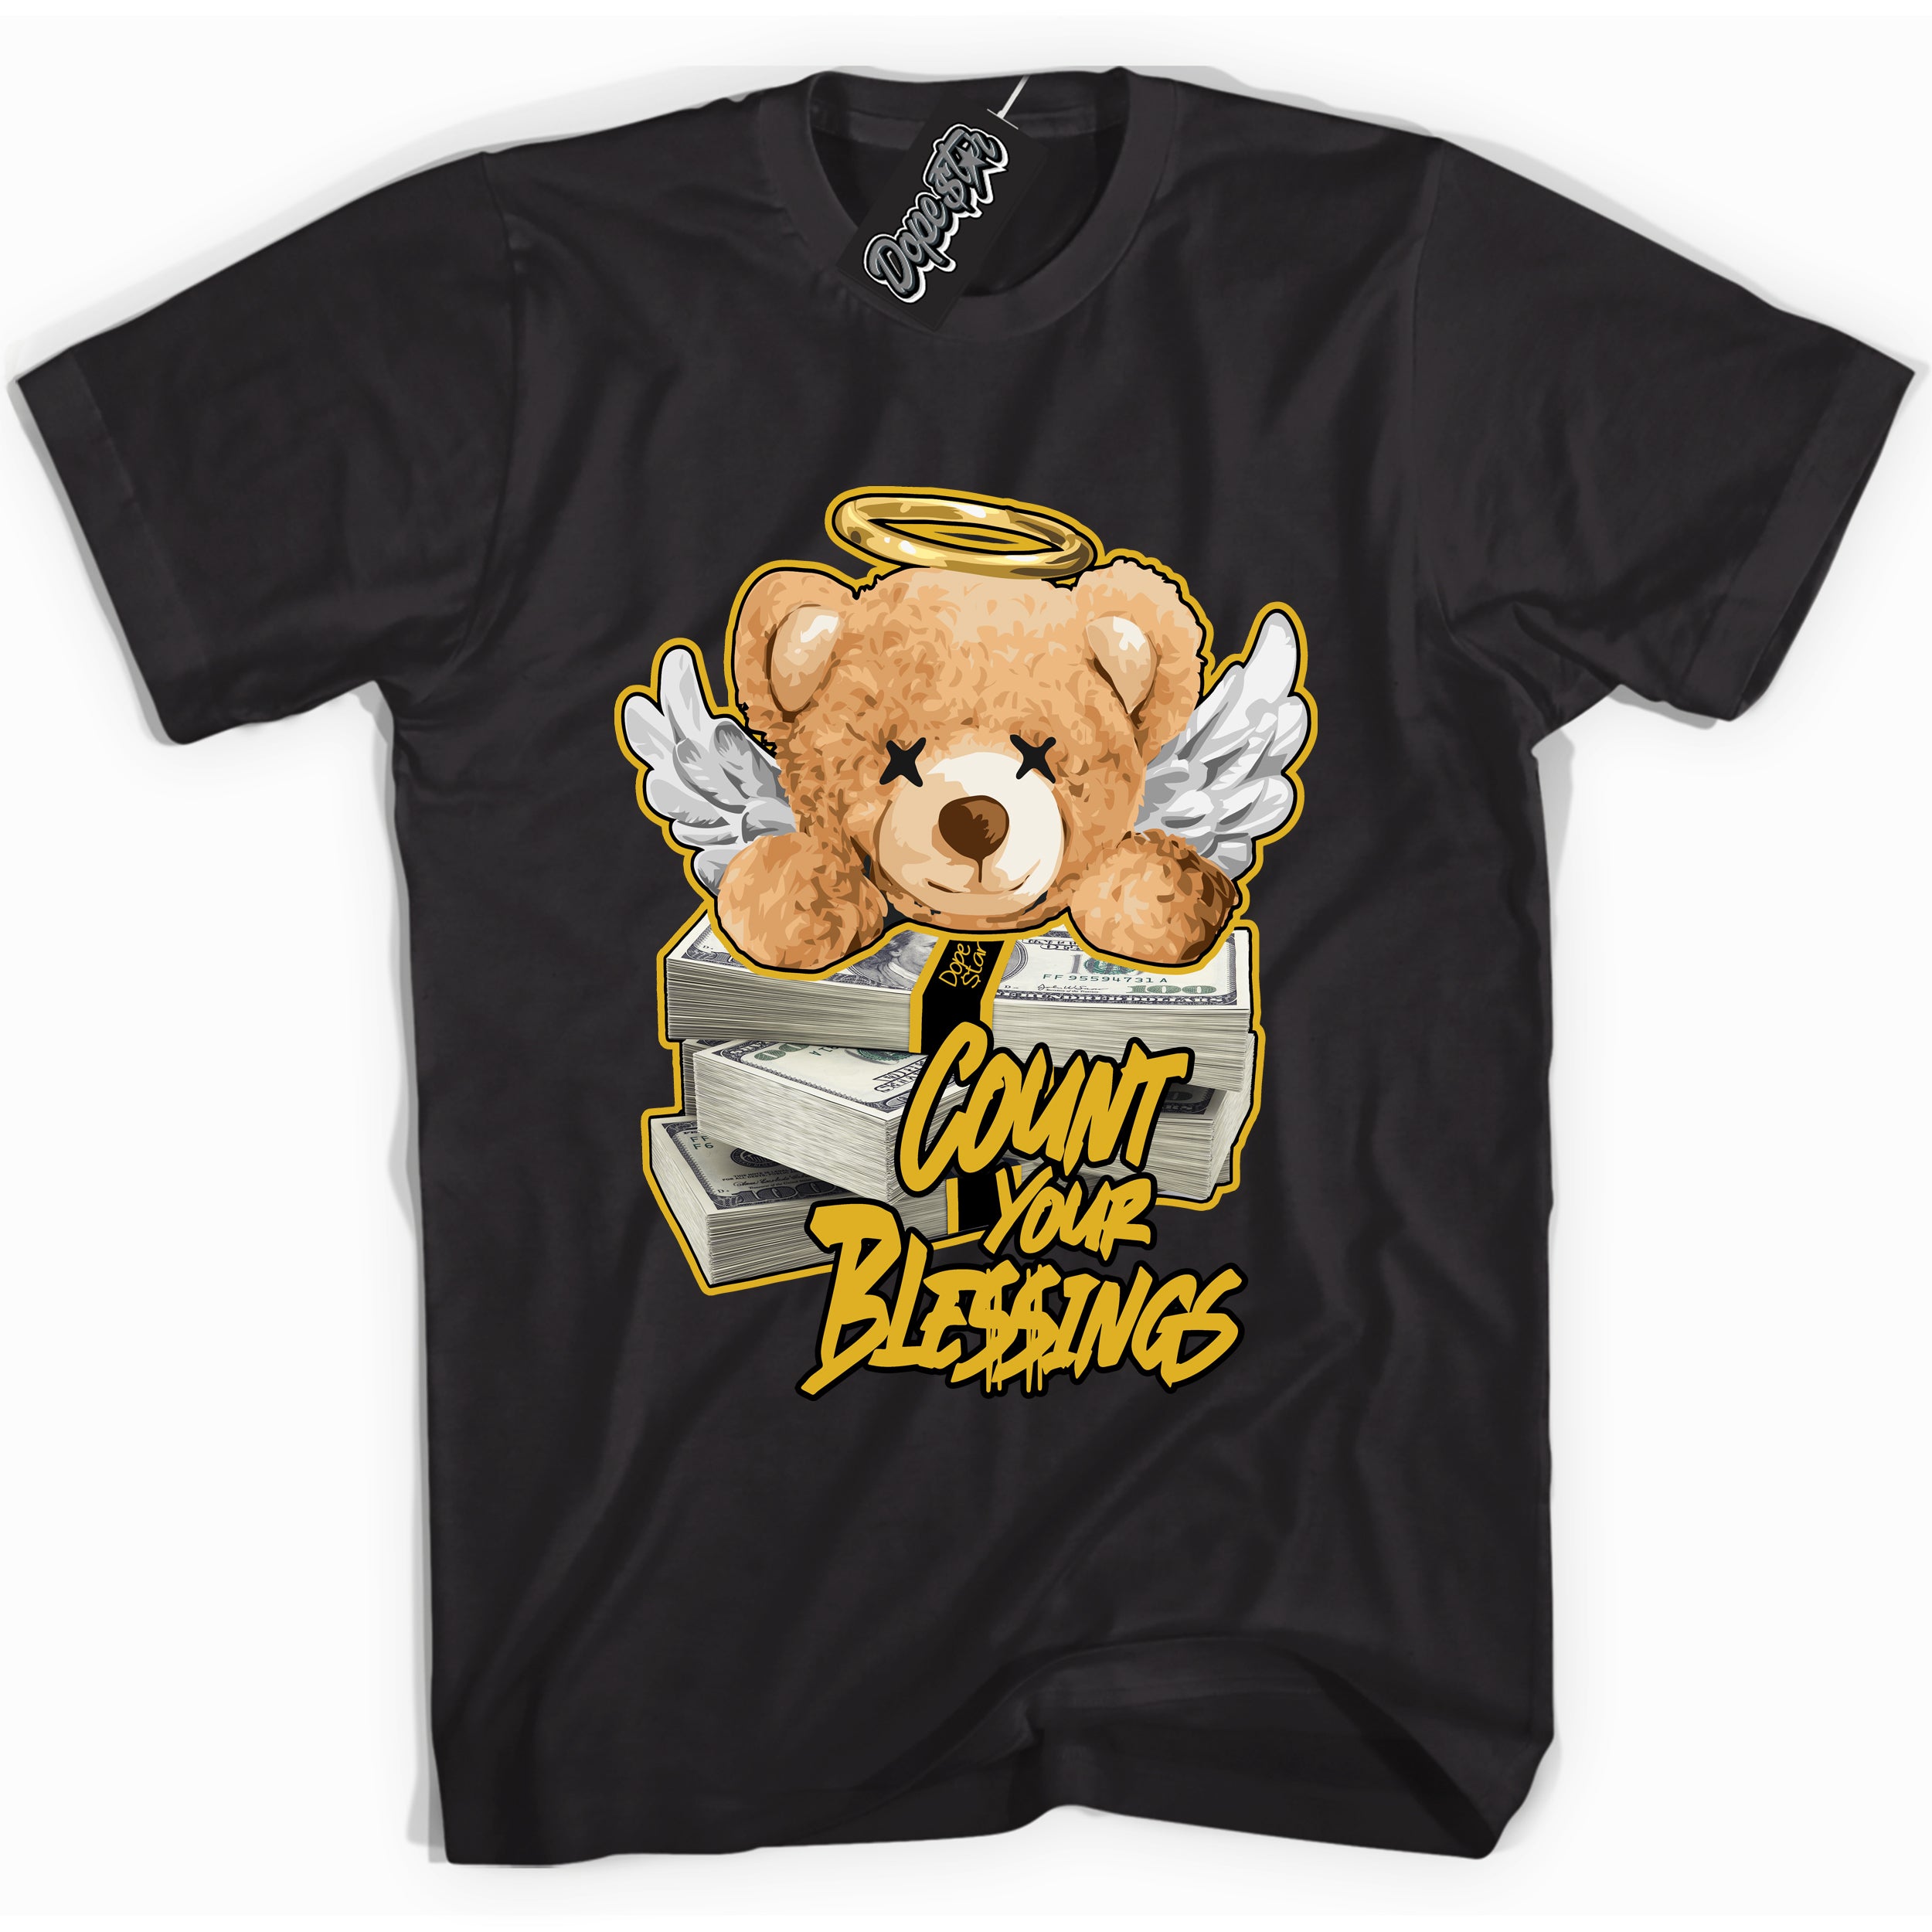 Cool Black Shirt with “ Count Your Blessings” design that perfectly matches Yellow Ochre 6s Sneakers.